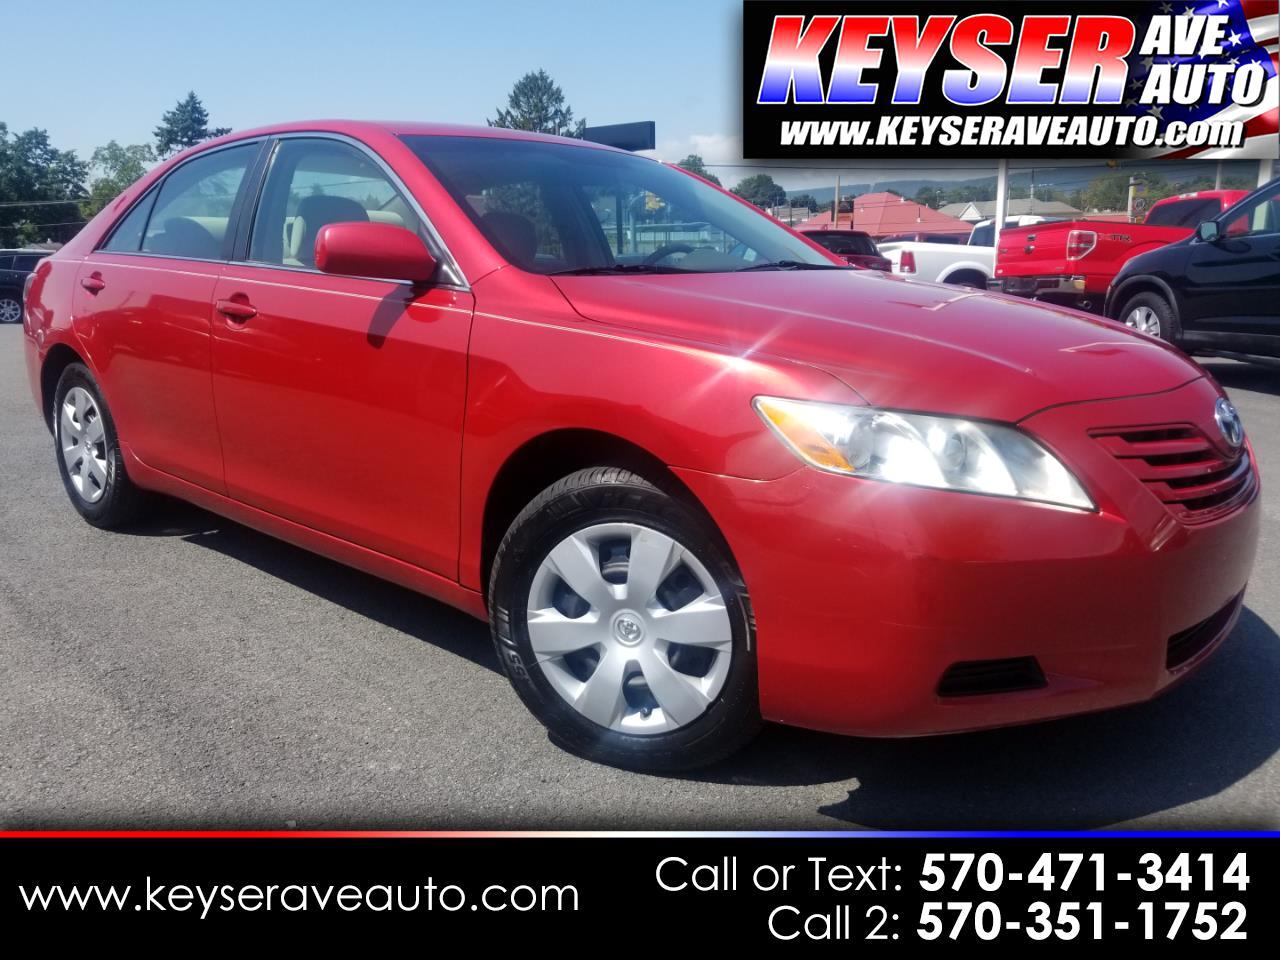 Used 2007 Toyota Camry Le 5 Spd At For Sale In Scranton Pa